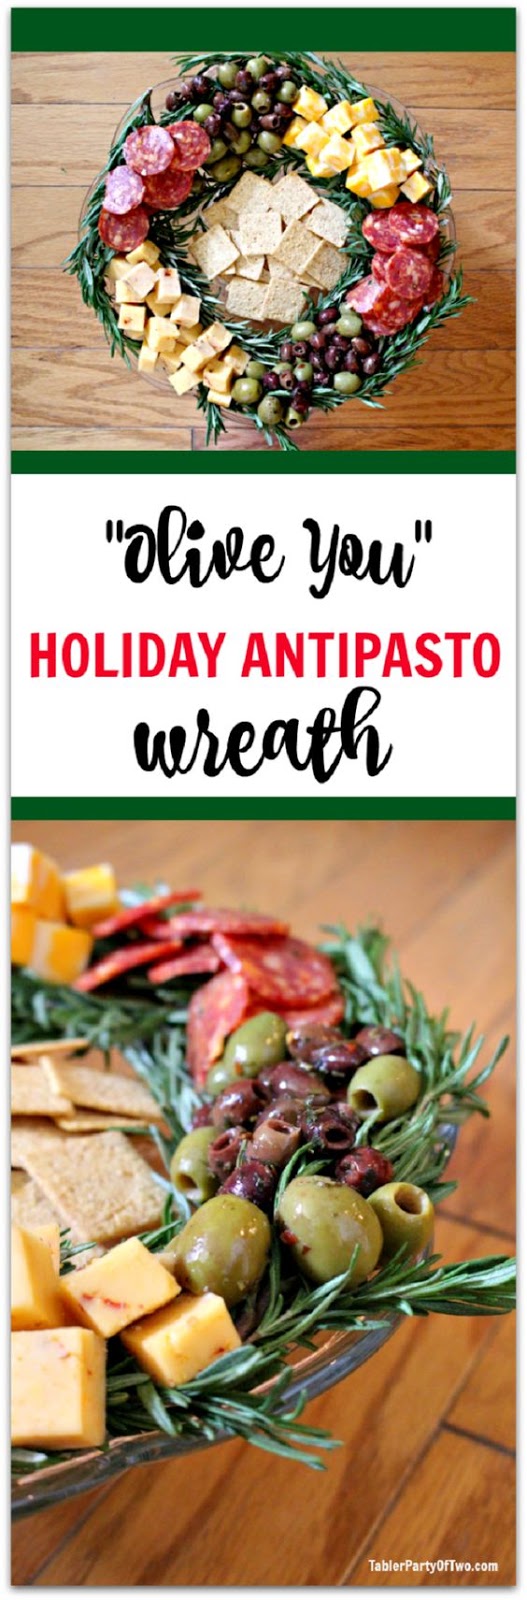 Holiday Antipasto Wreath - 19 Entertaining Christmas Food Ideas for The Big Holiday Dinner Gathering